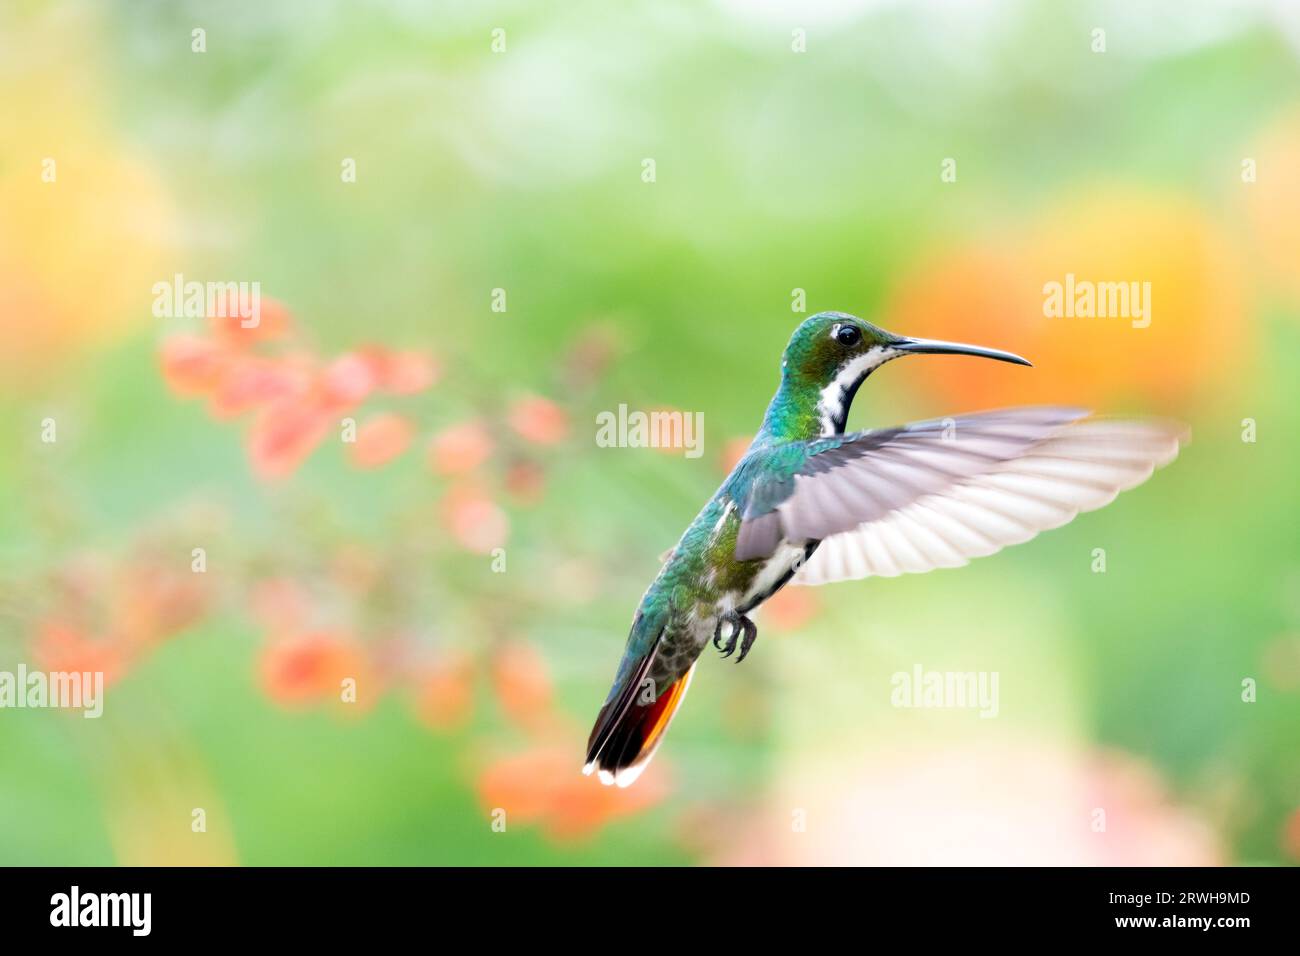 Black-throated Mango hummingbird, Anthracothorax nigricollis flying in a garden with pastel colored background Stock Photo